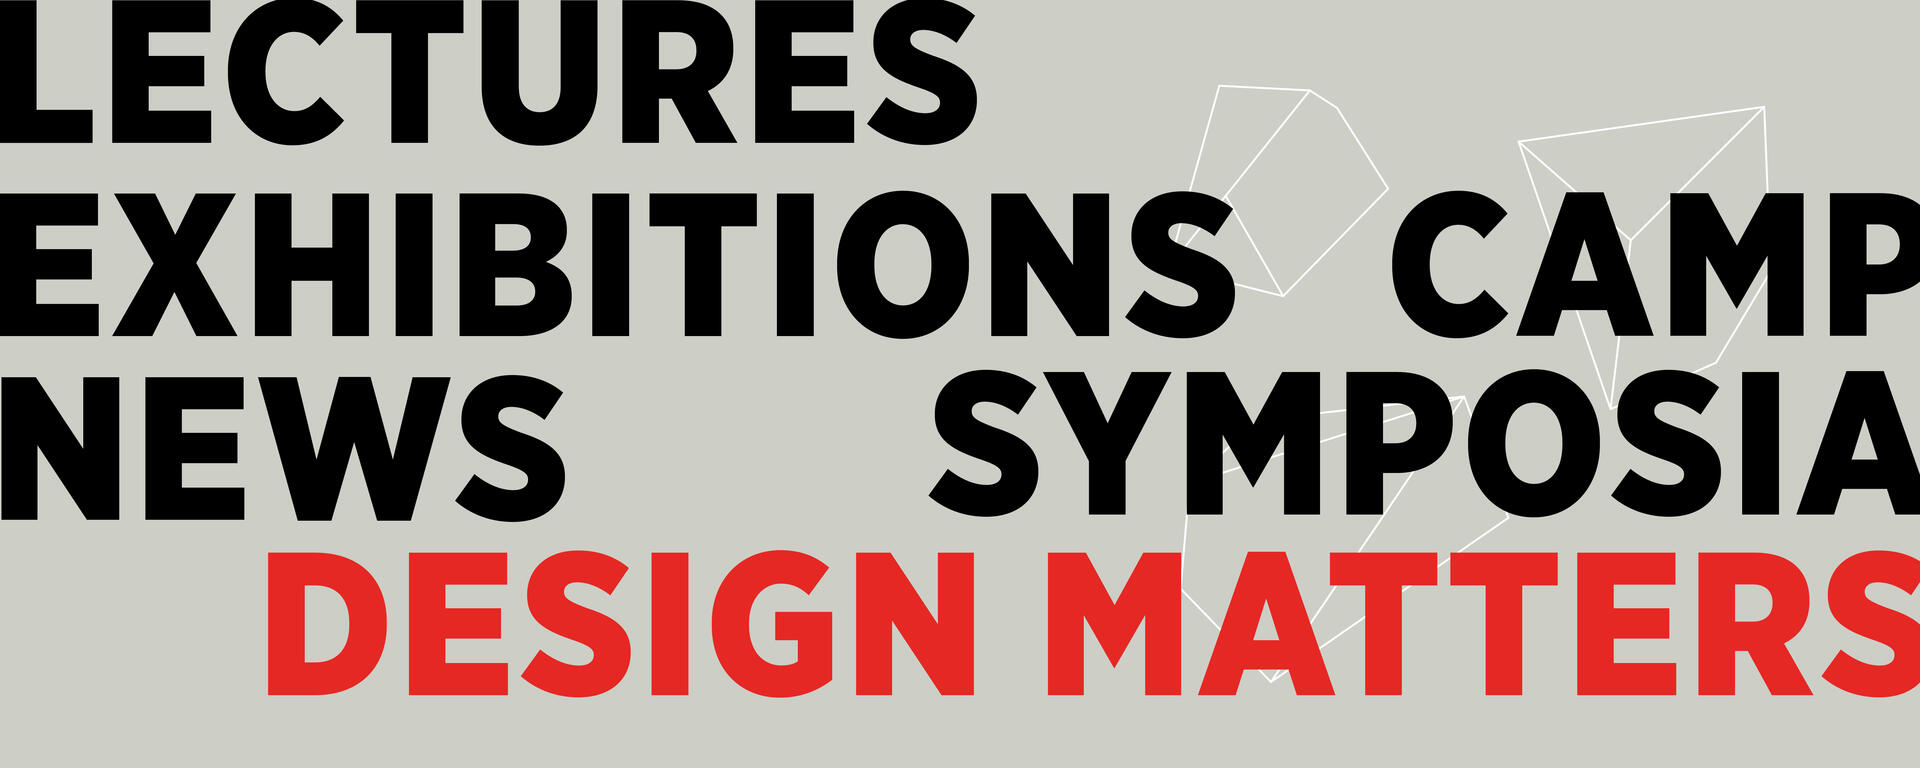 Lectures, Exhibitions, News, Symposia, Camp, Design Matters